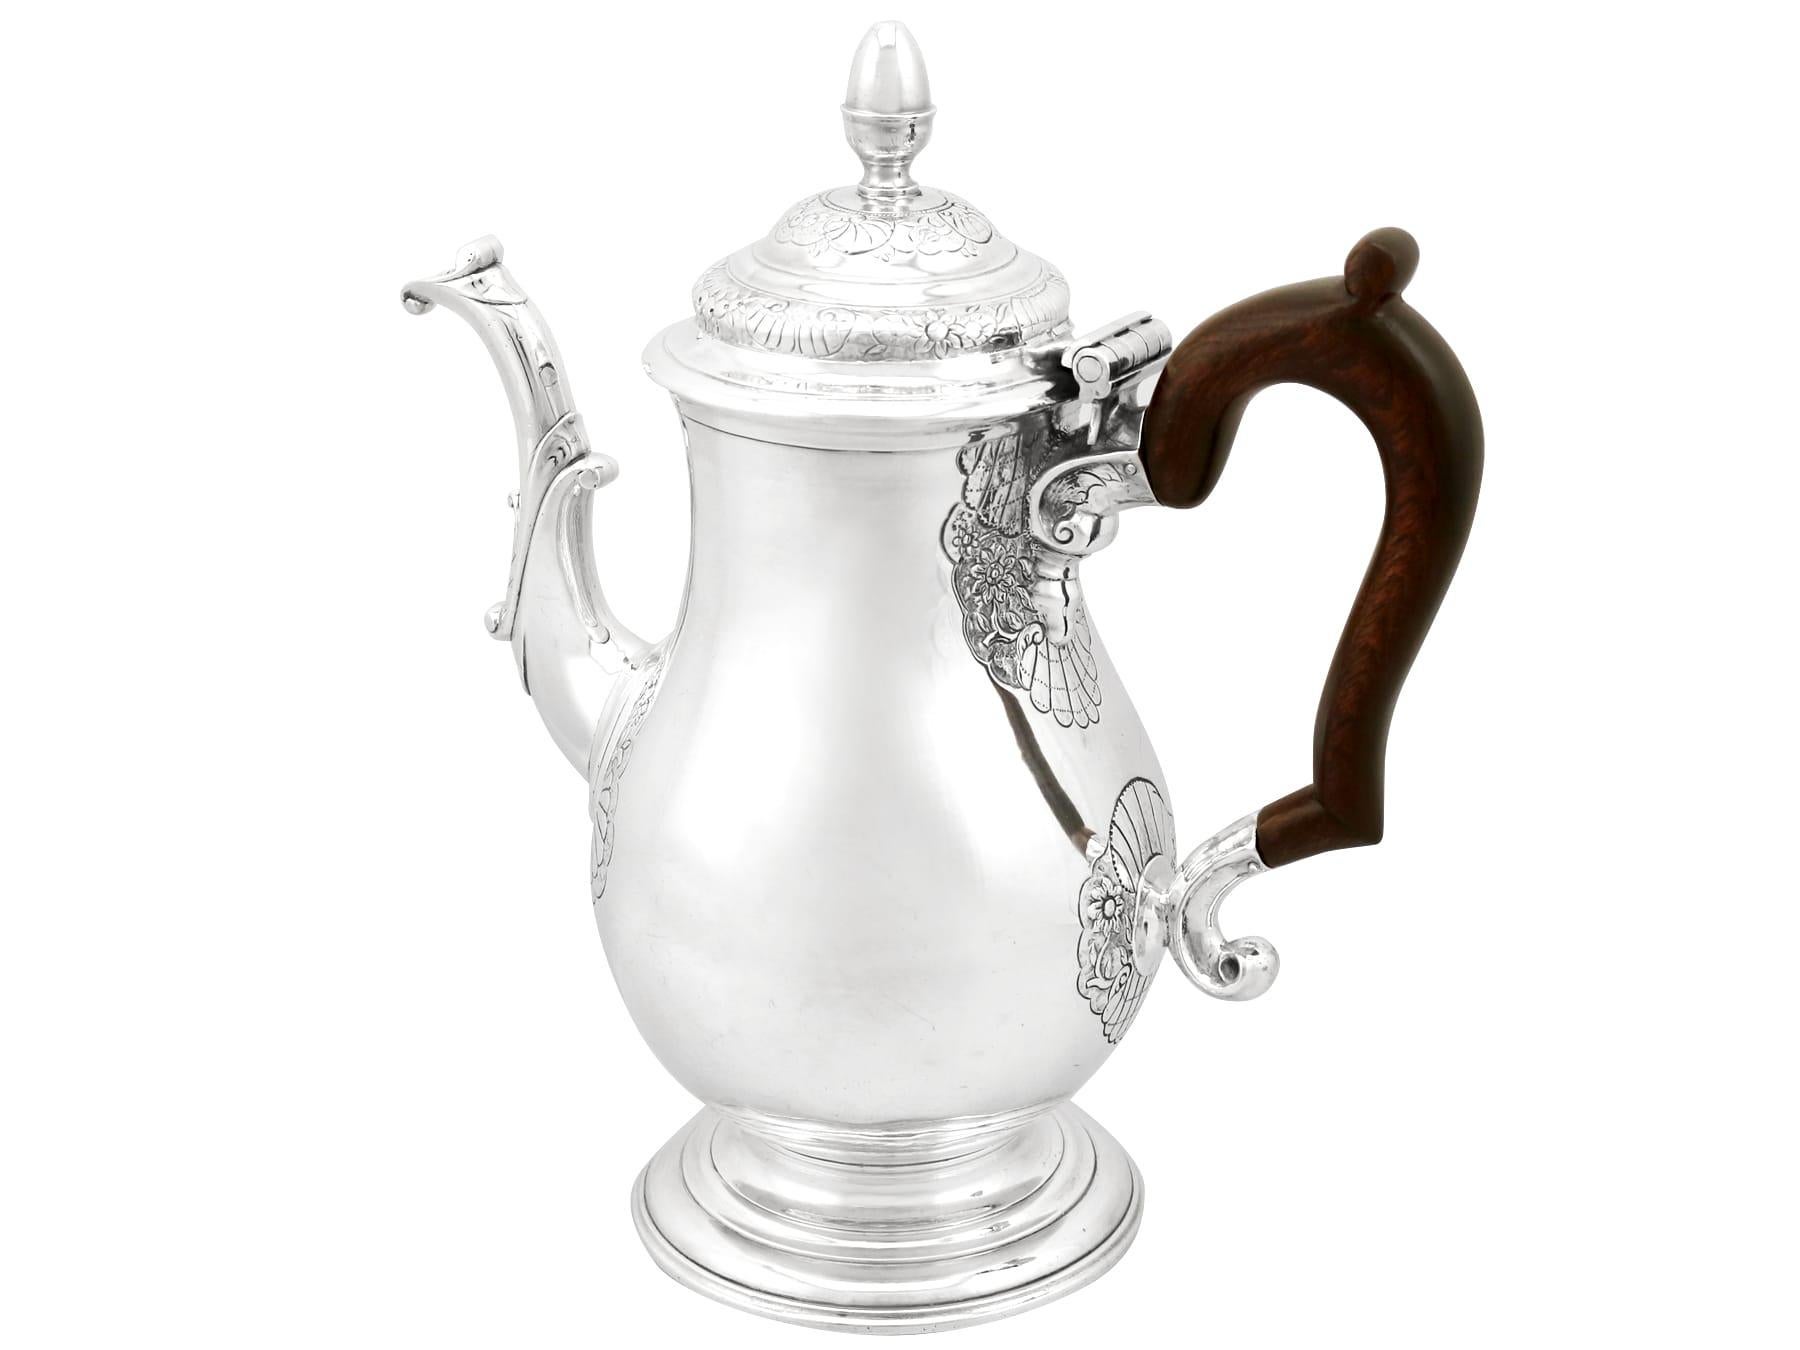 An exceptional, fine and impressive antique George II Newcastle sterling silver coffee pot, an addition to our Georgian silver teaware collection.

This exceptional antique George II Newcastle sterling silver coffee pot has a baluster shaped form